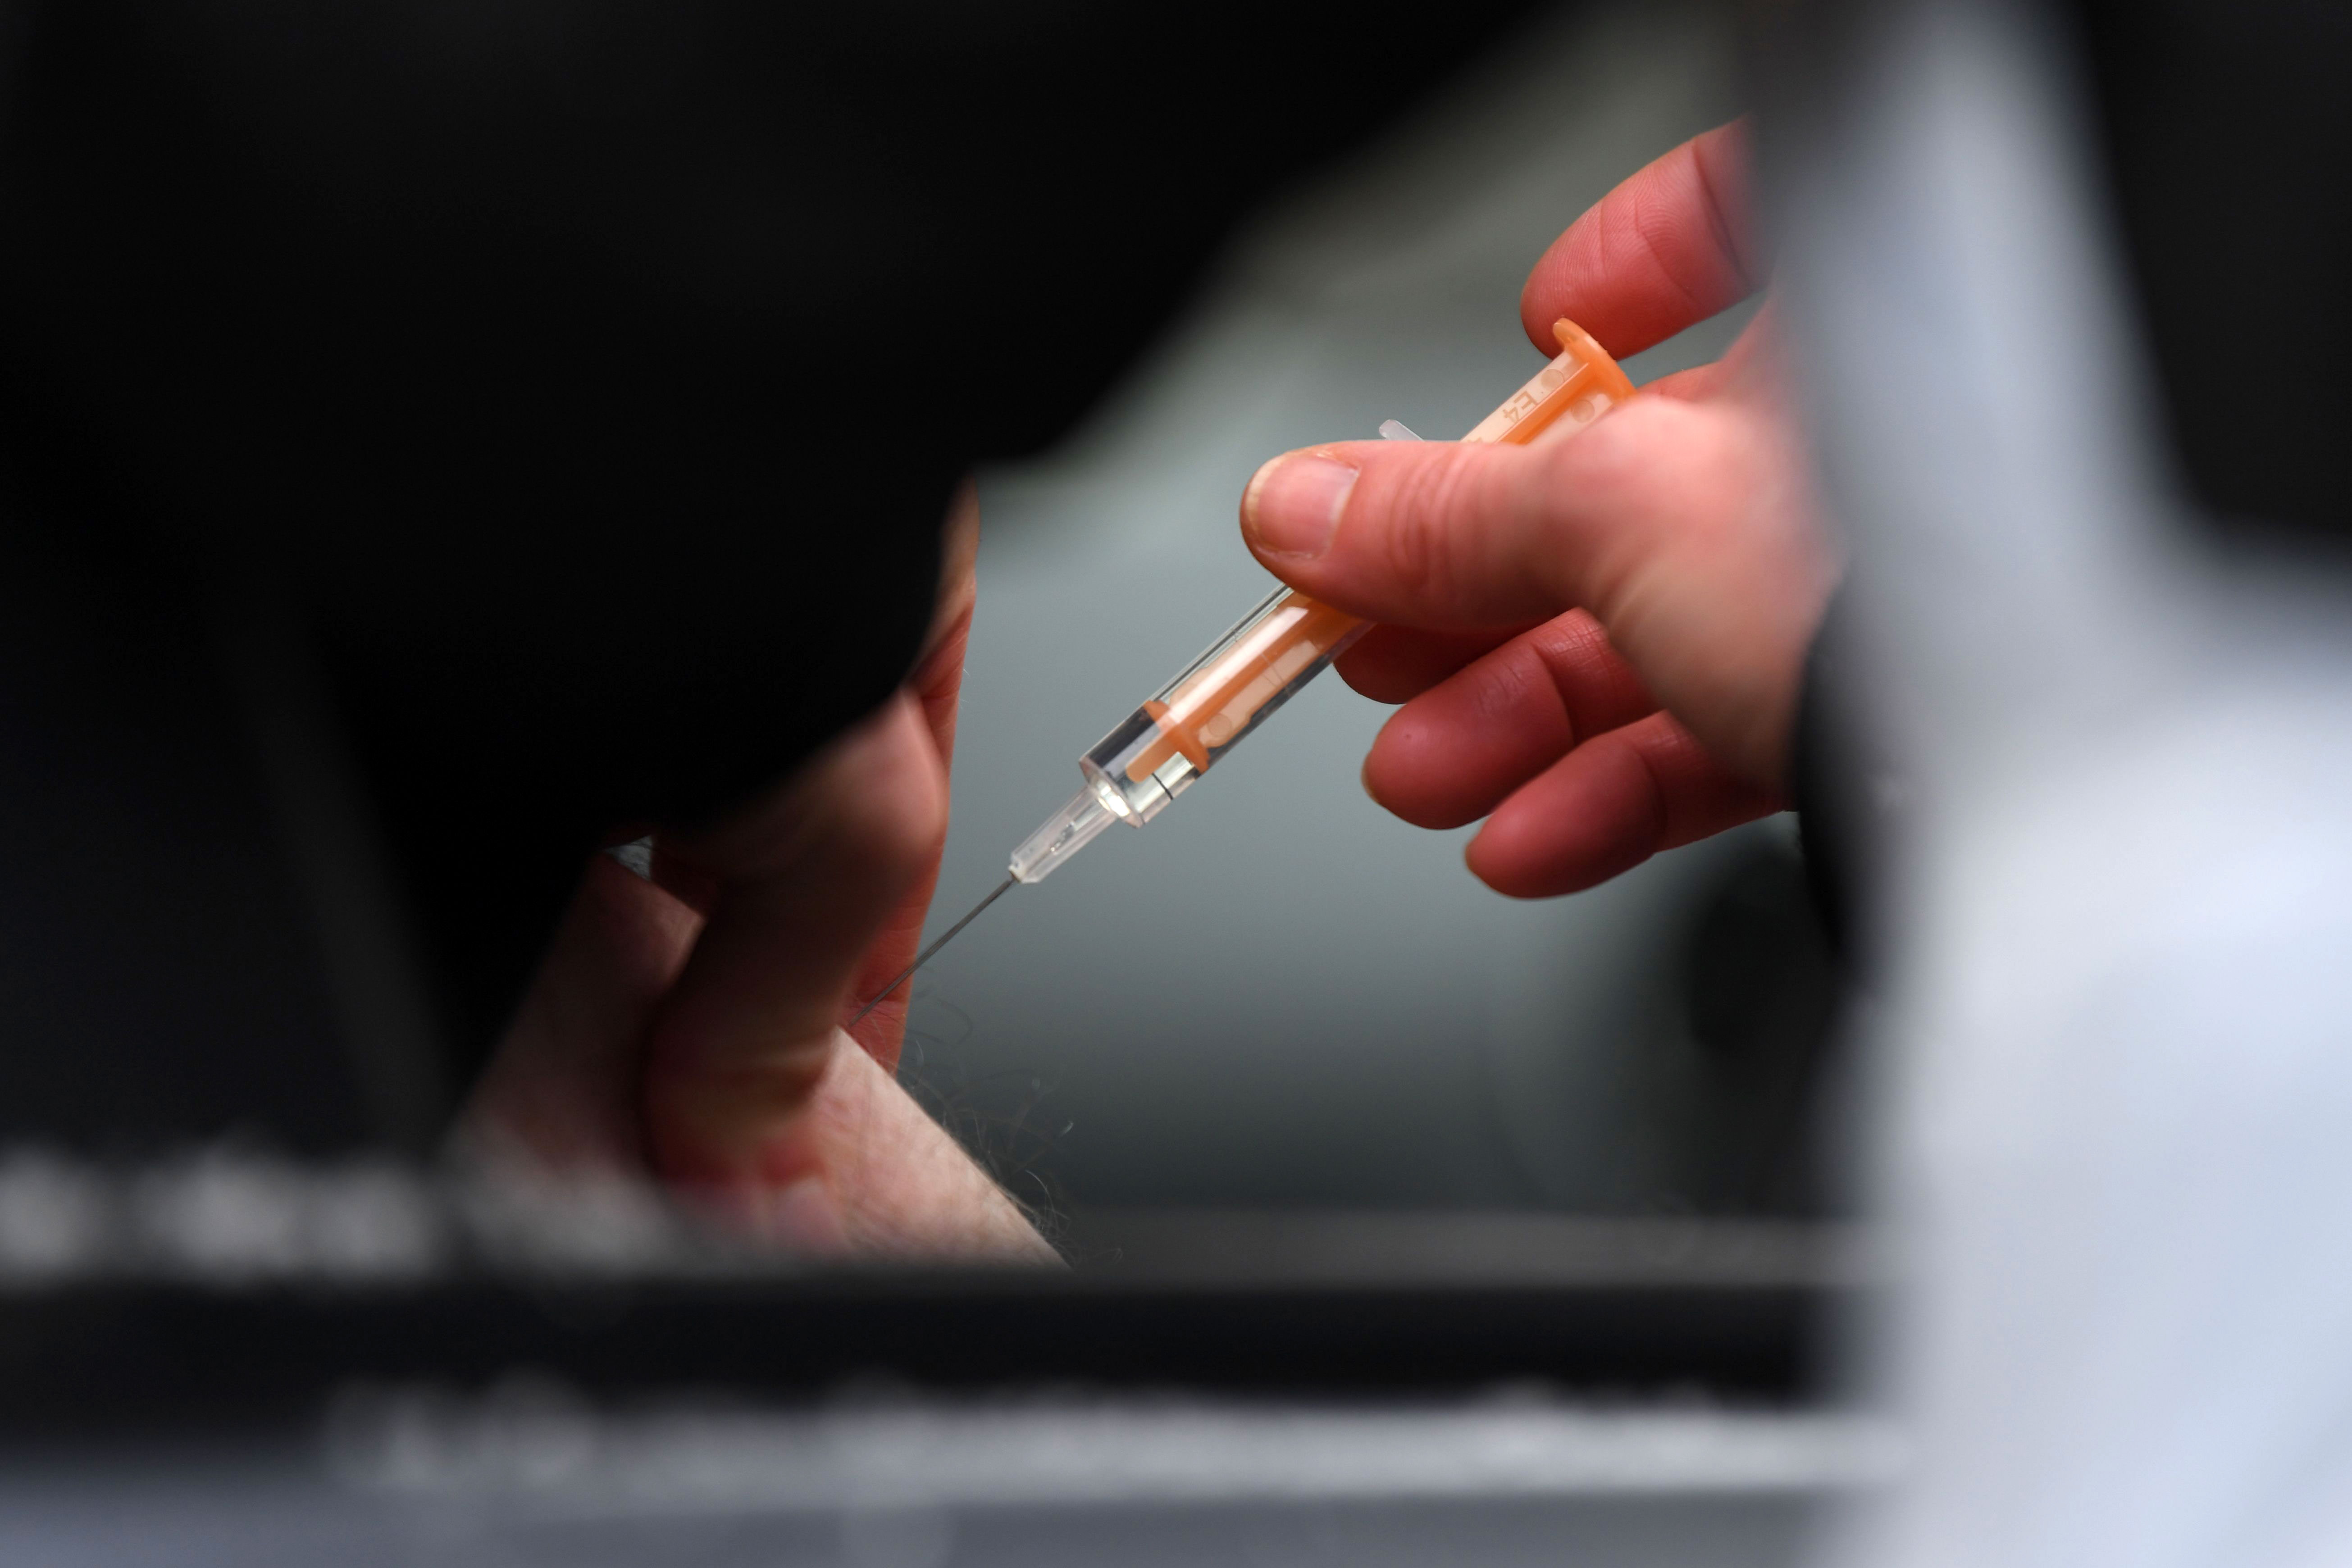 A health worker administers a Covid-19 vaccine in St Albans, England, on February 8.